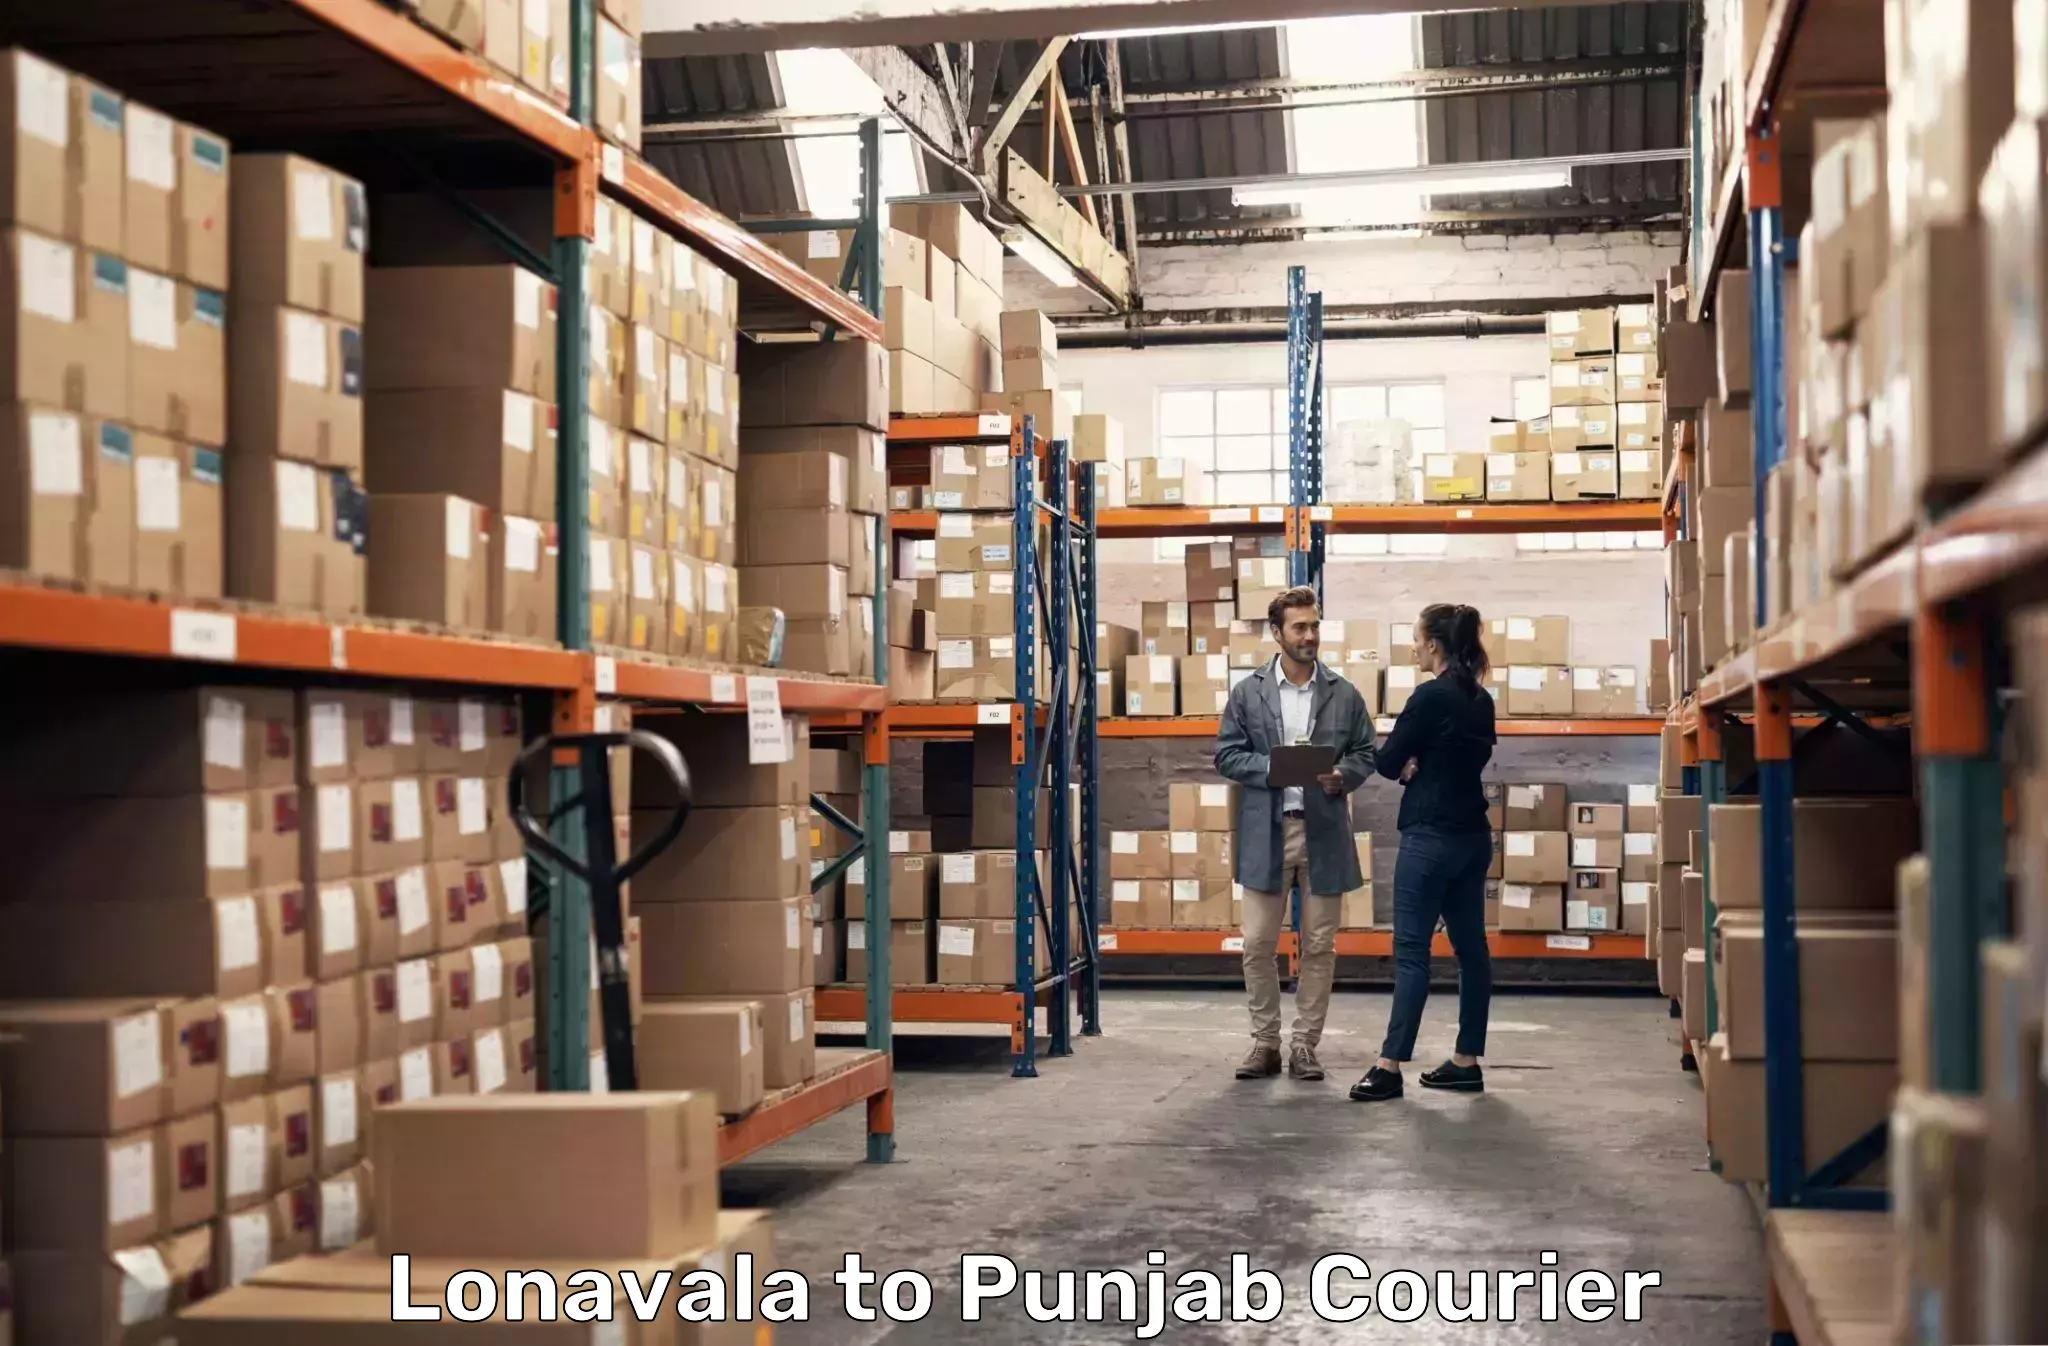 Subscription-based courier Lonavala to IIT Ropar